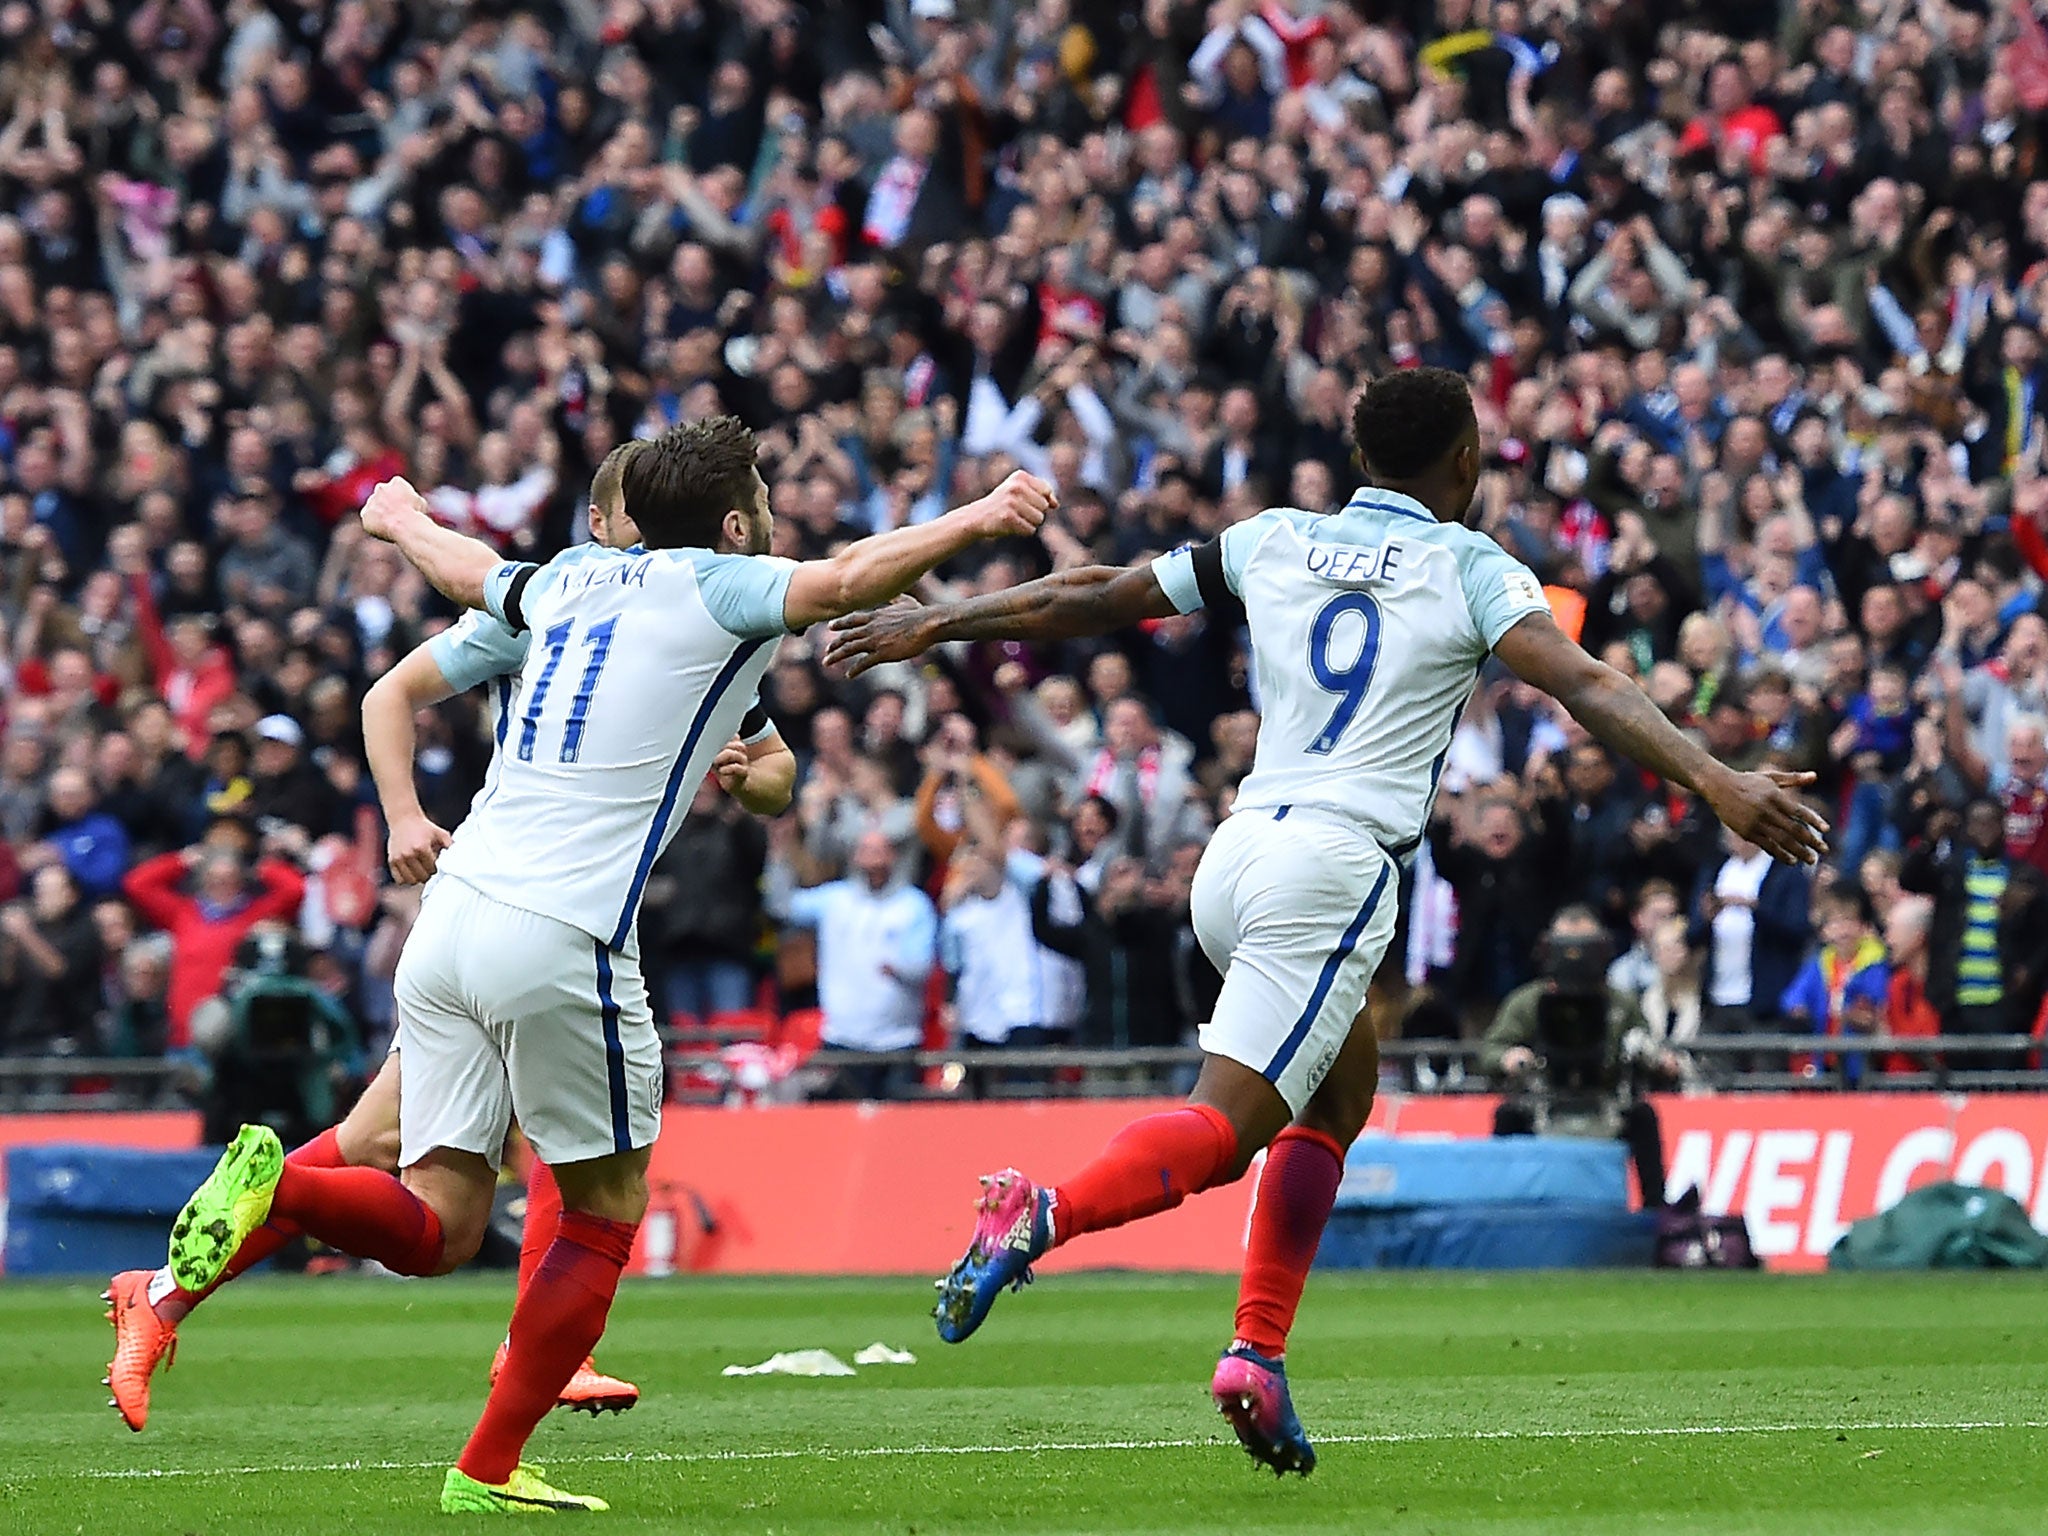 Defoe celebrates with teammates after scoring in England's World Cup 2018 qualifier against Lithuania